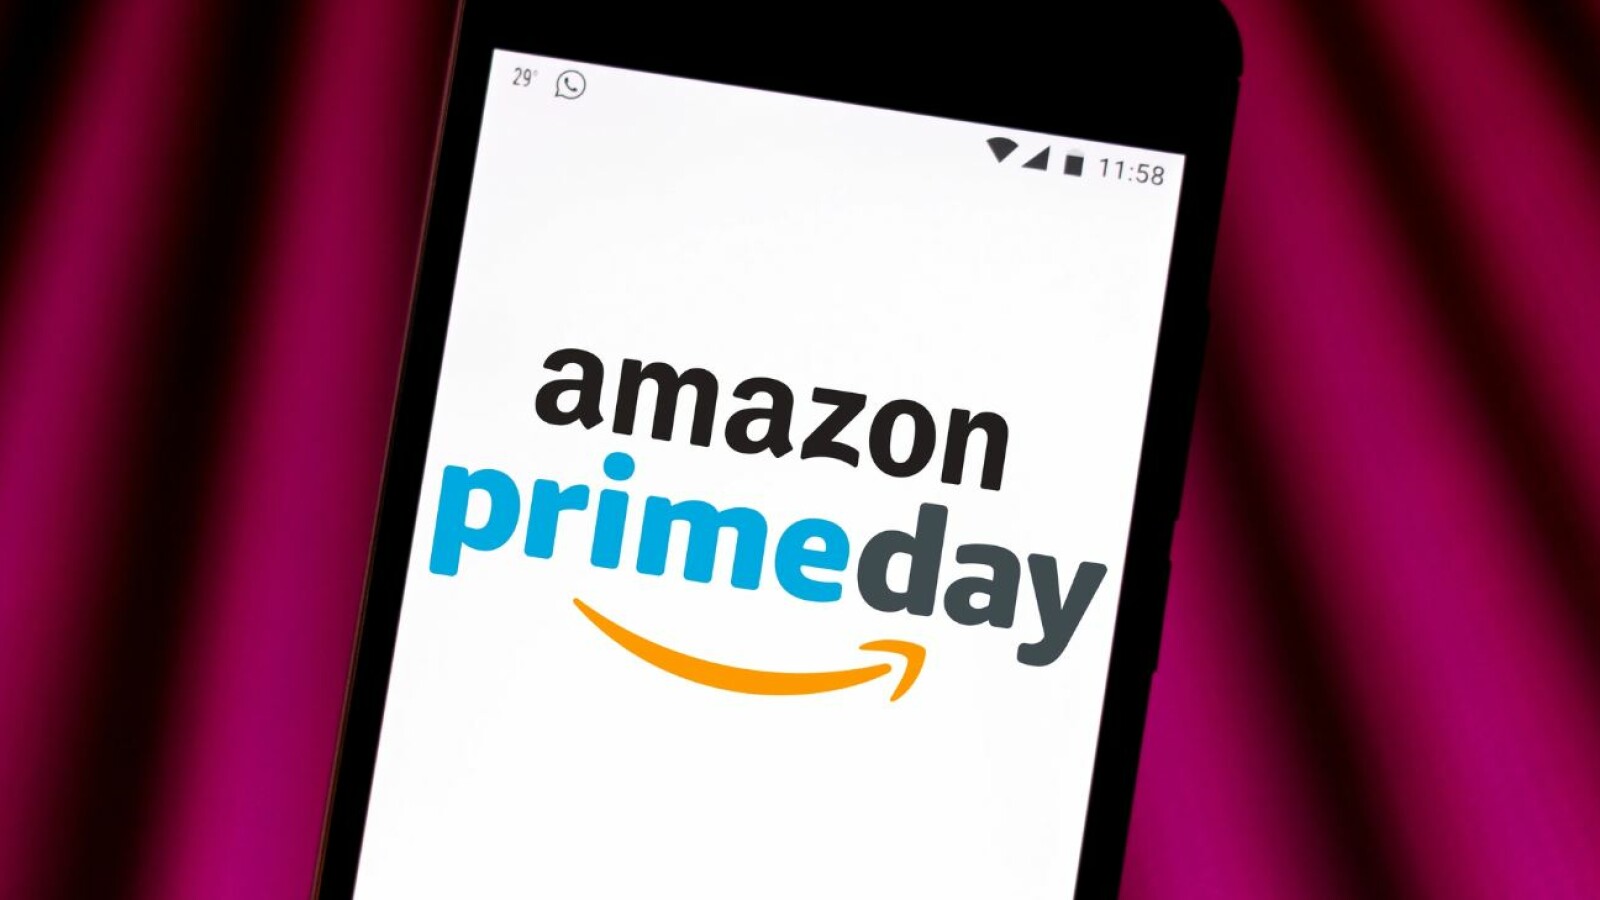 Amazon Prime Day 2021: A sneak peek of all the pre-order info and deals